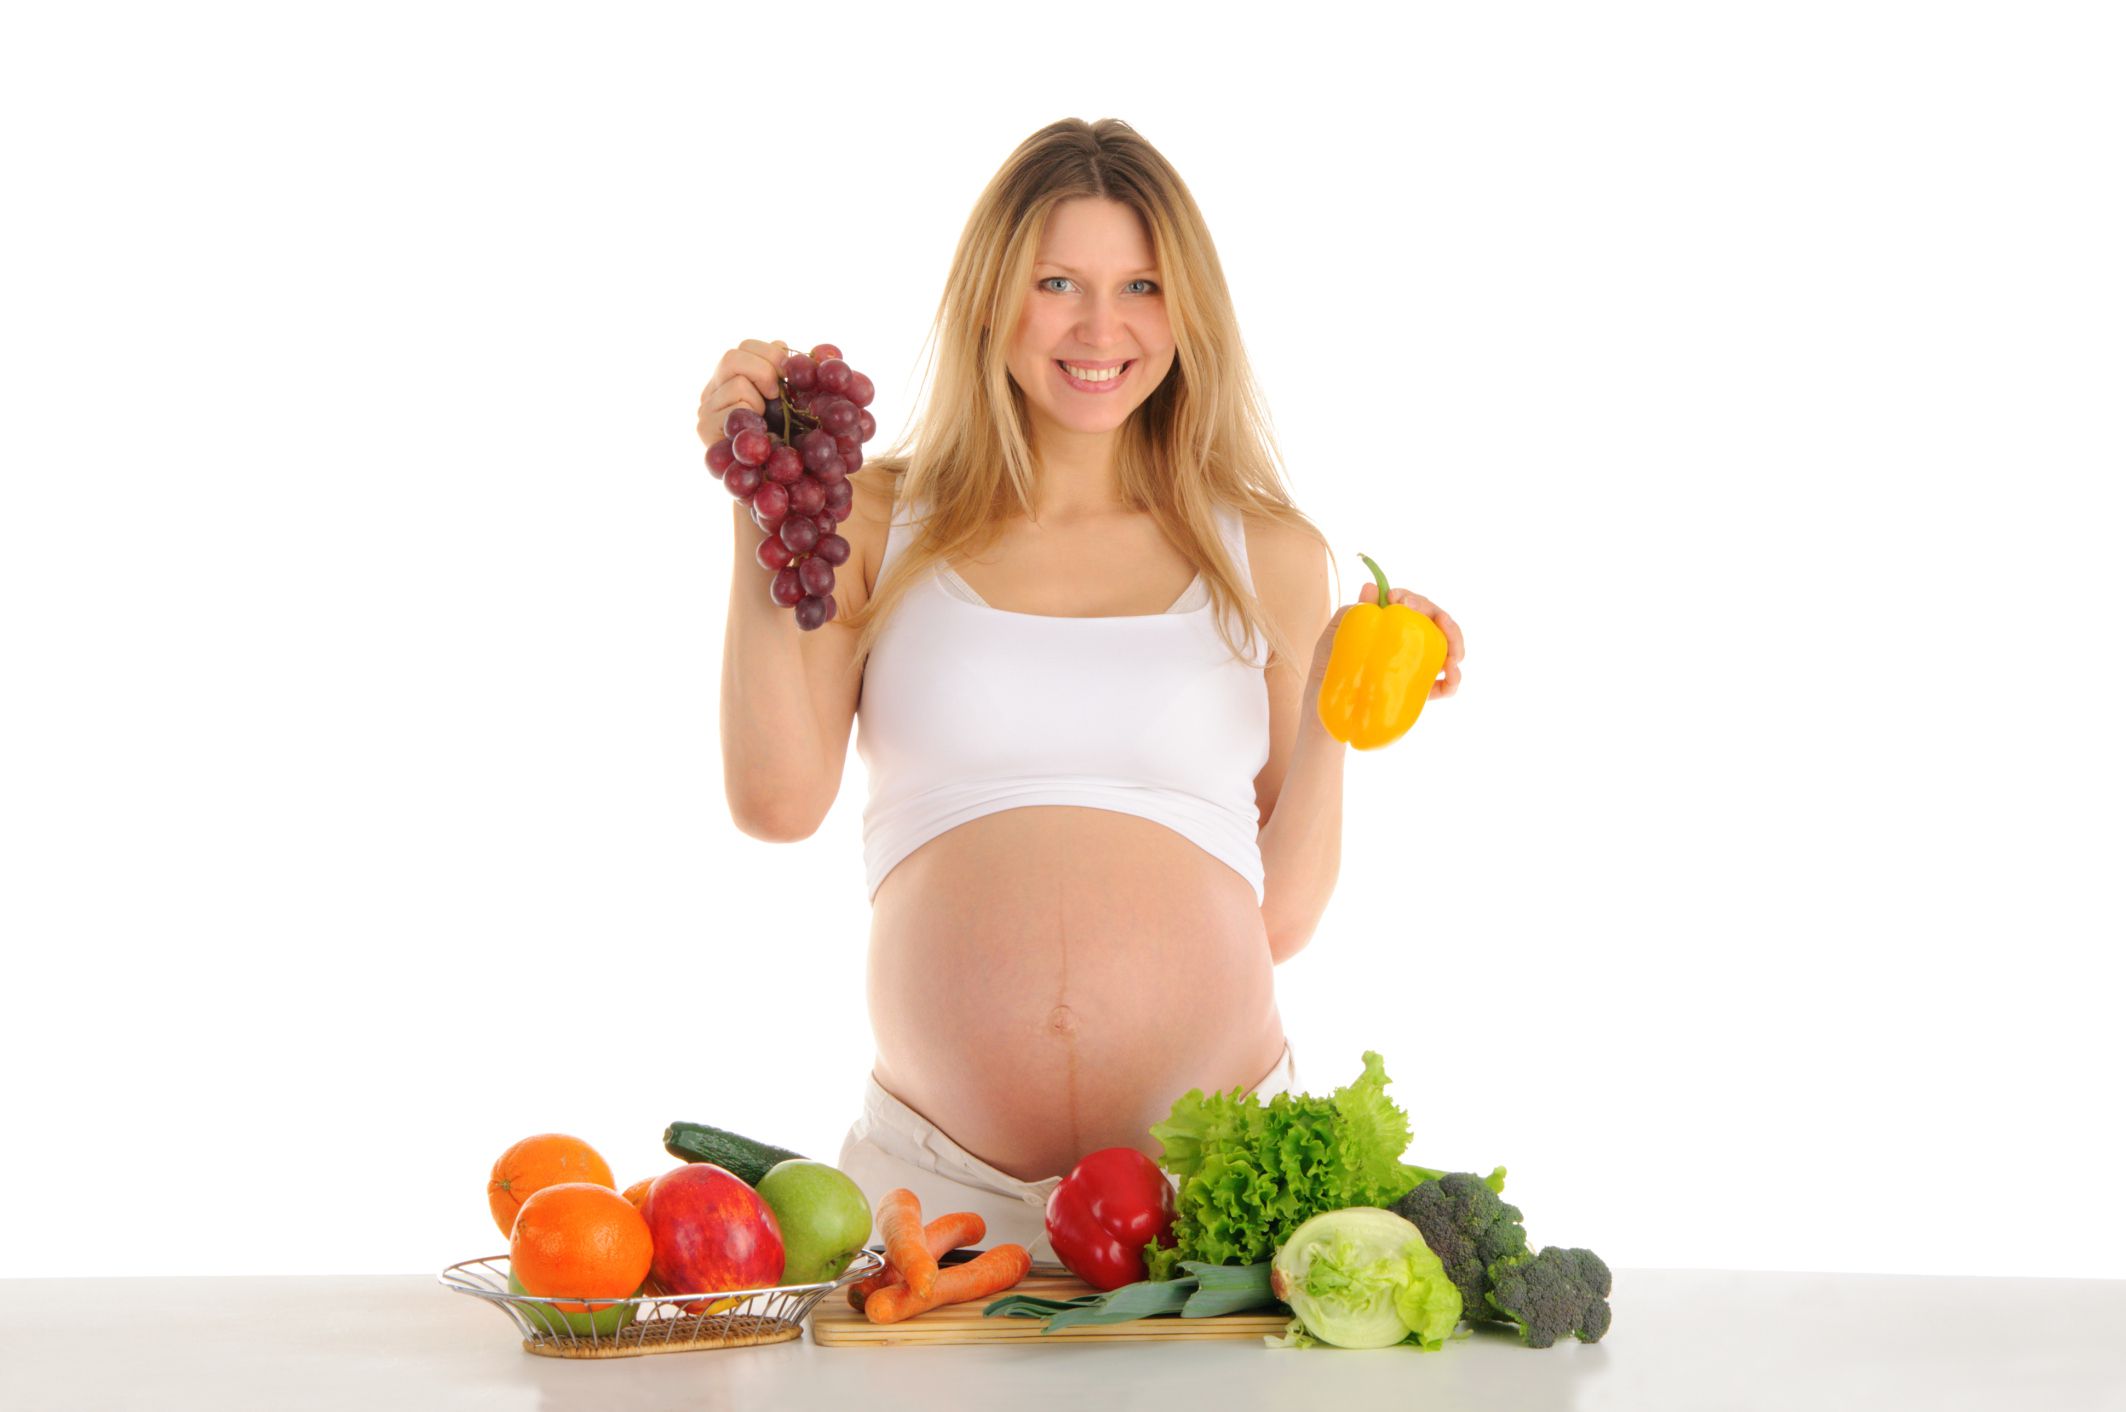 Can You Diet While Pregnant?